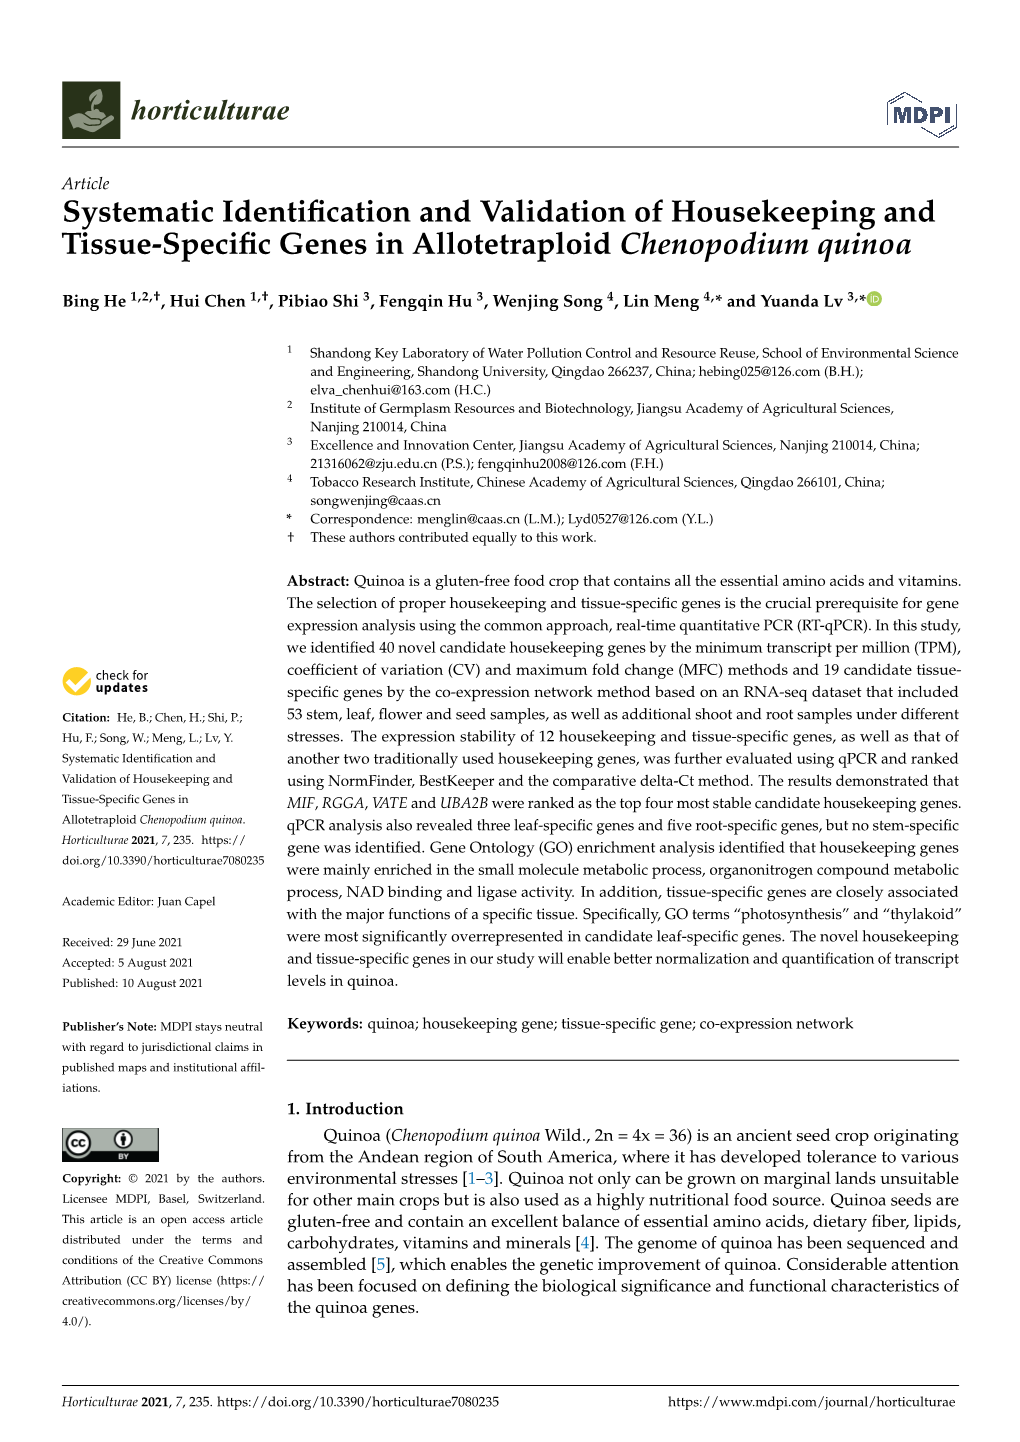 Systematic Identification and Validation of Housekeeping And